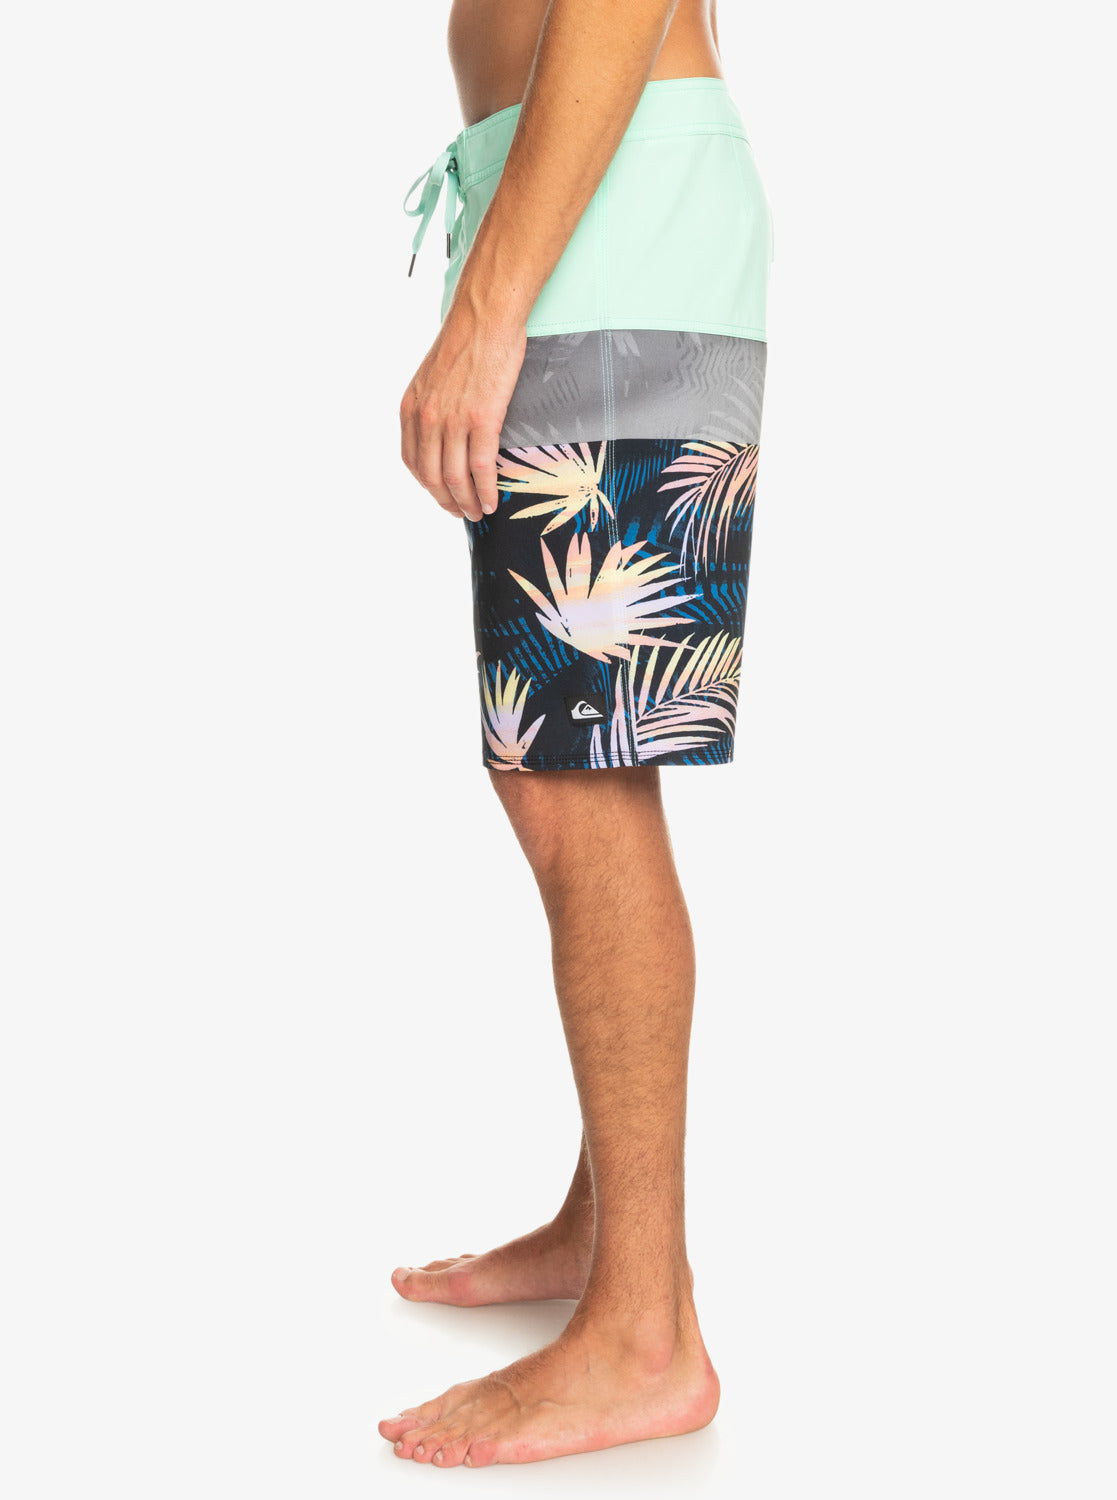 Quiksilver Surfsilk Panel 20" Boardshorts  Style #EQYBS04781 Color Code gcz6